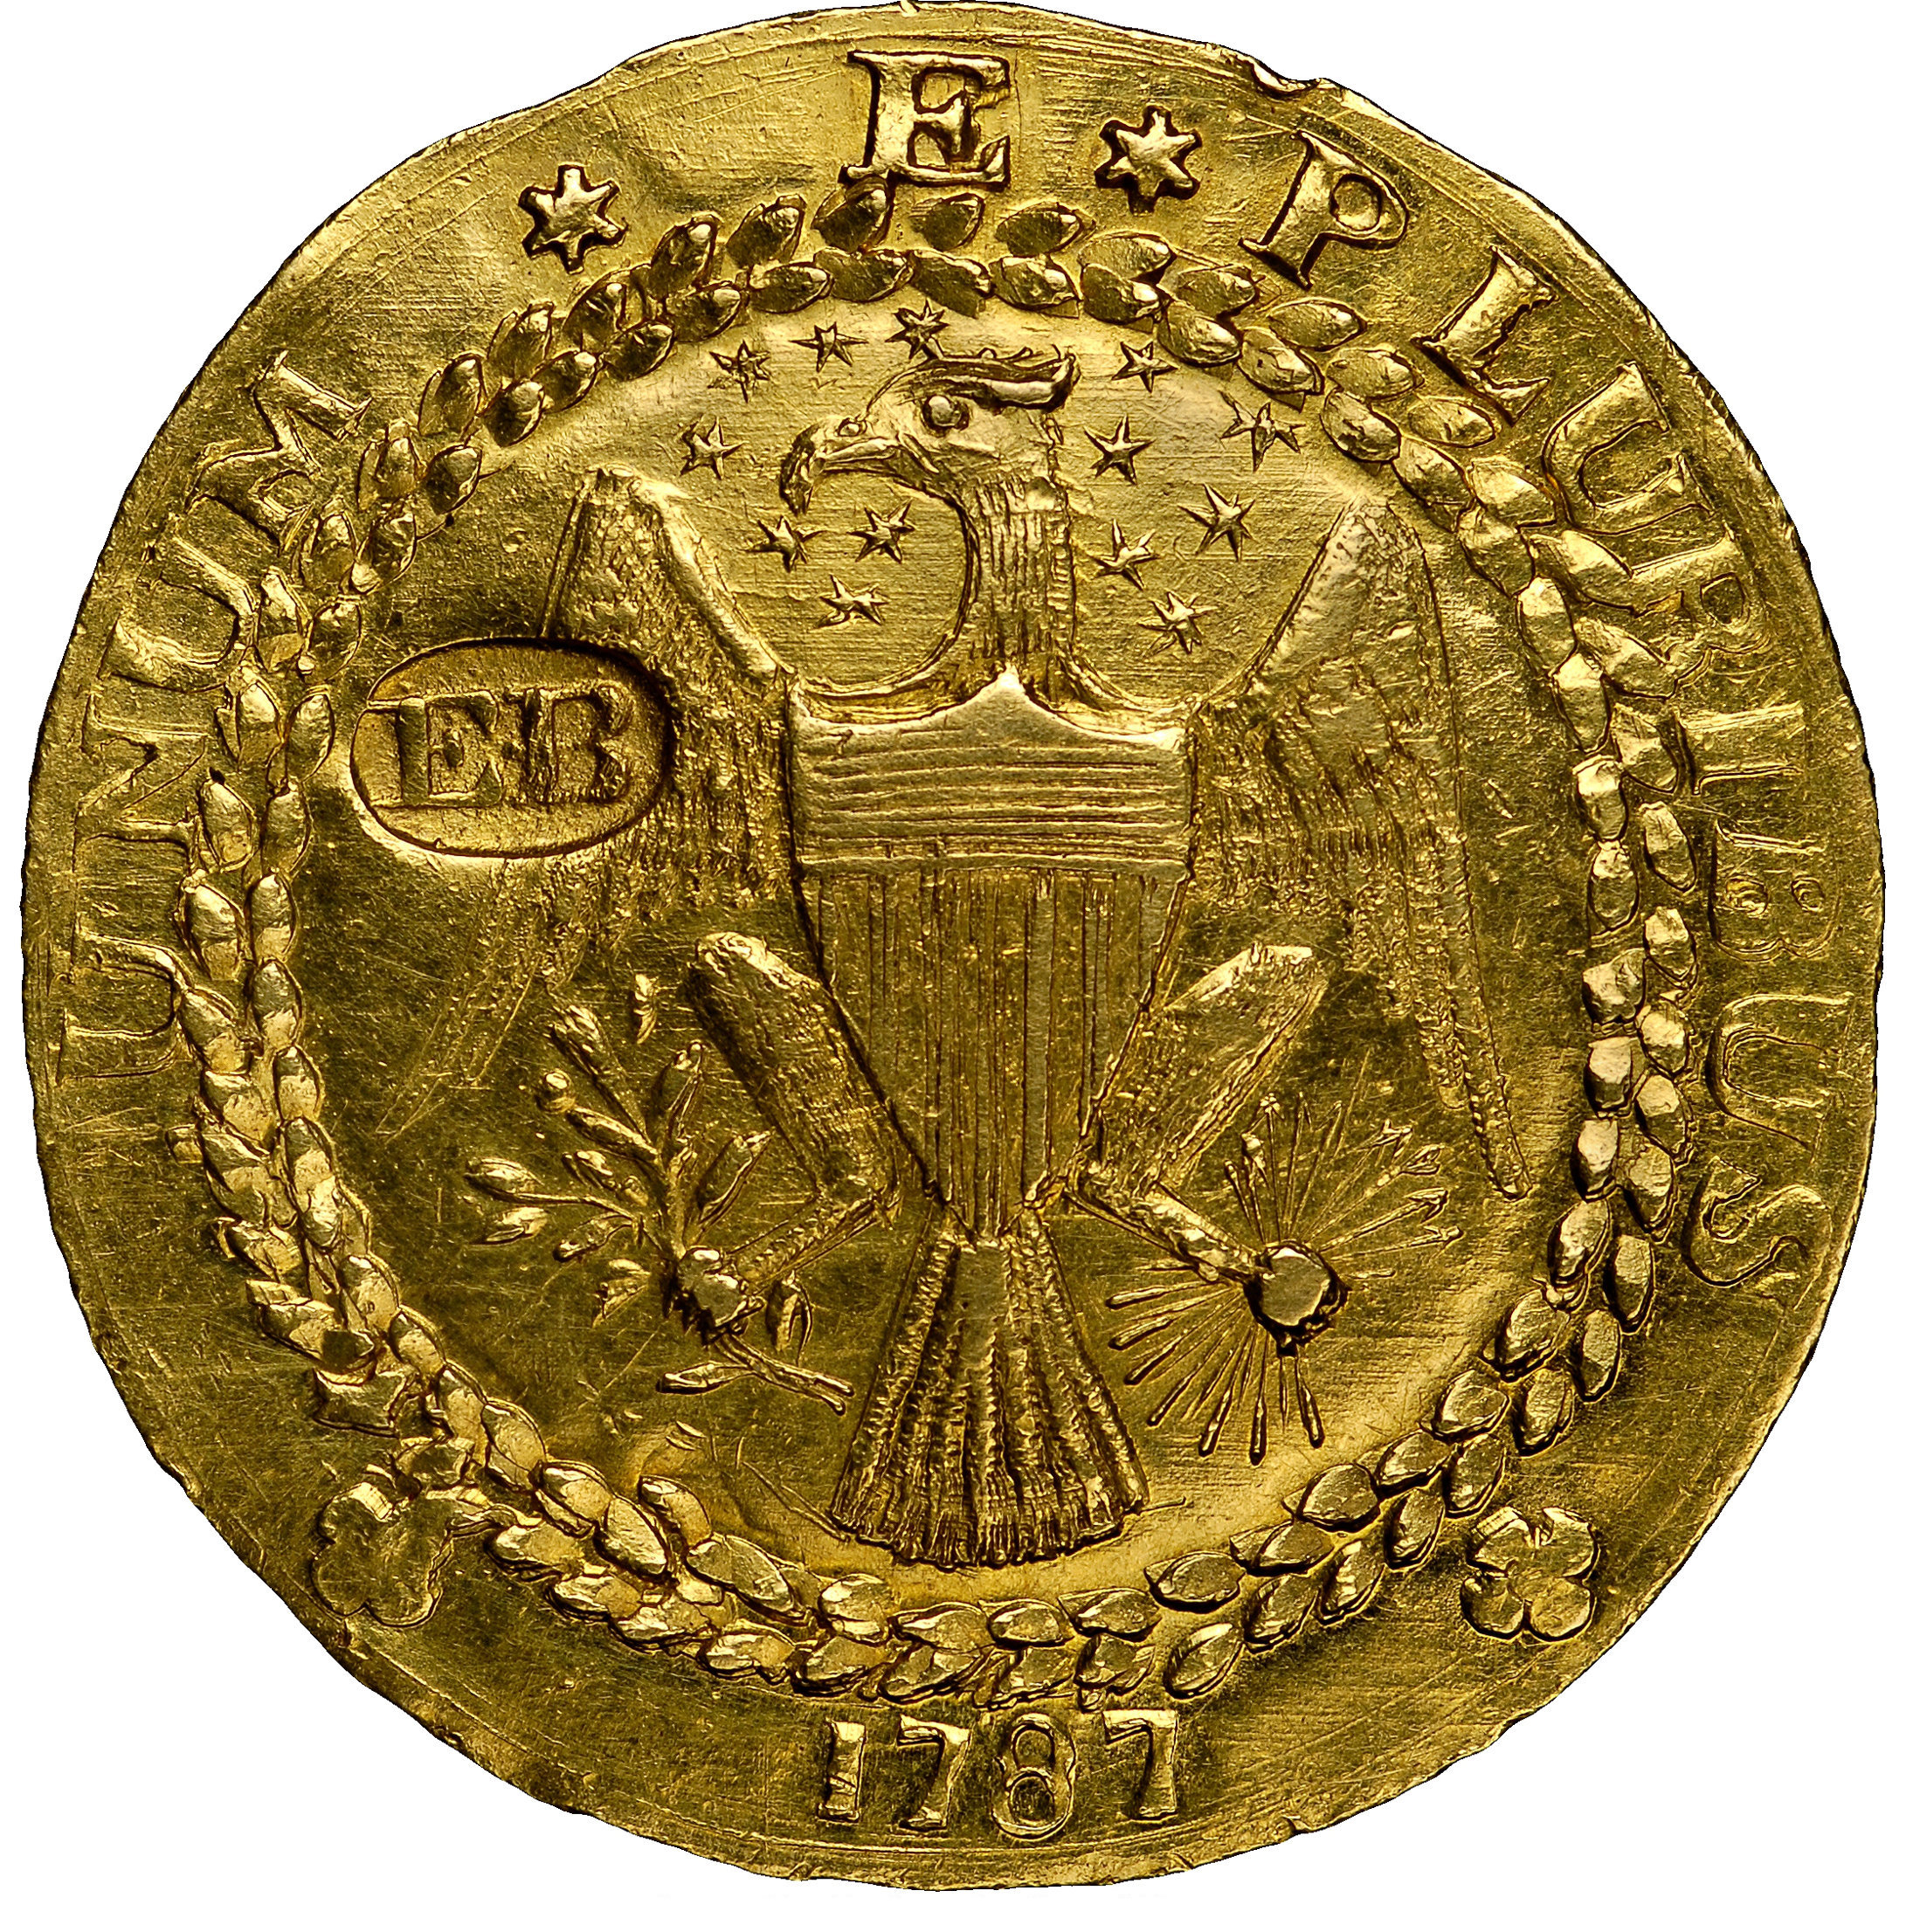 Brasher Doubloon - Photo Courtesy Heritage Auctions, HA.com